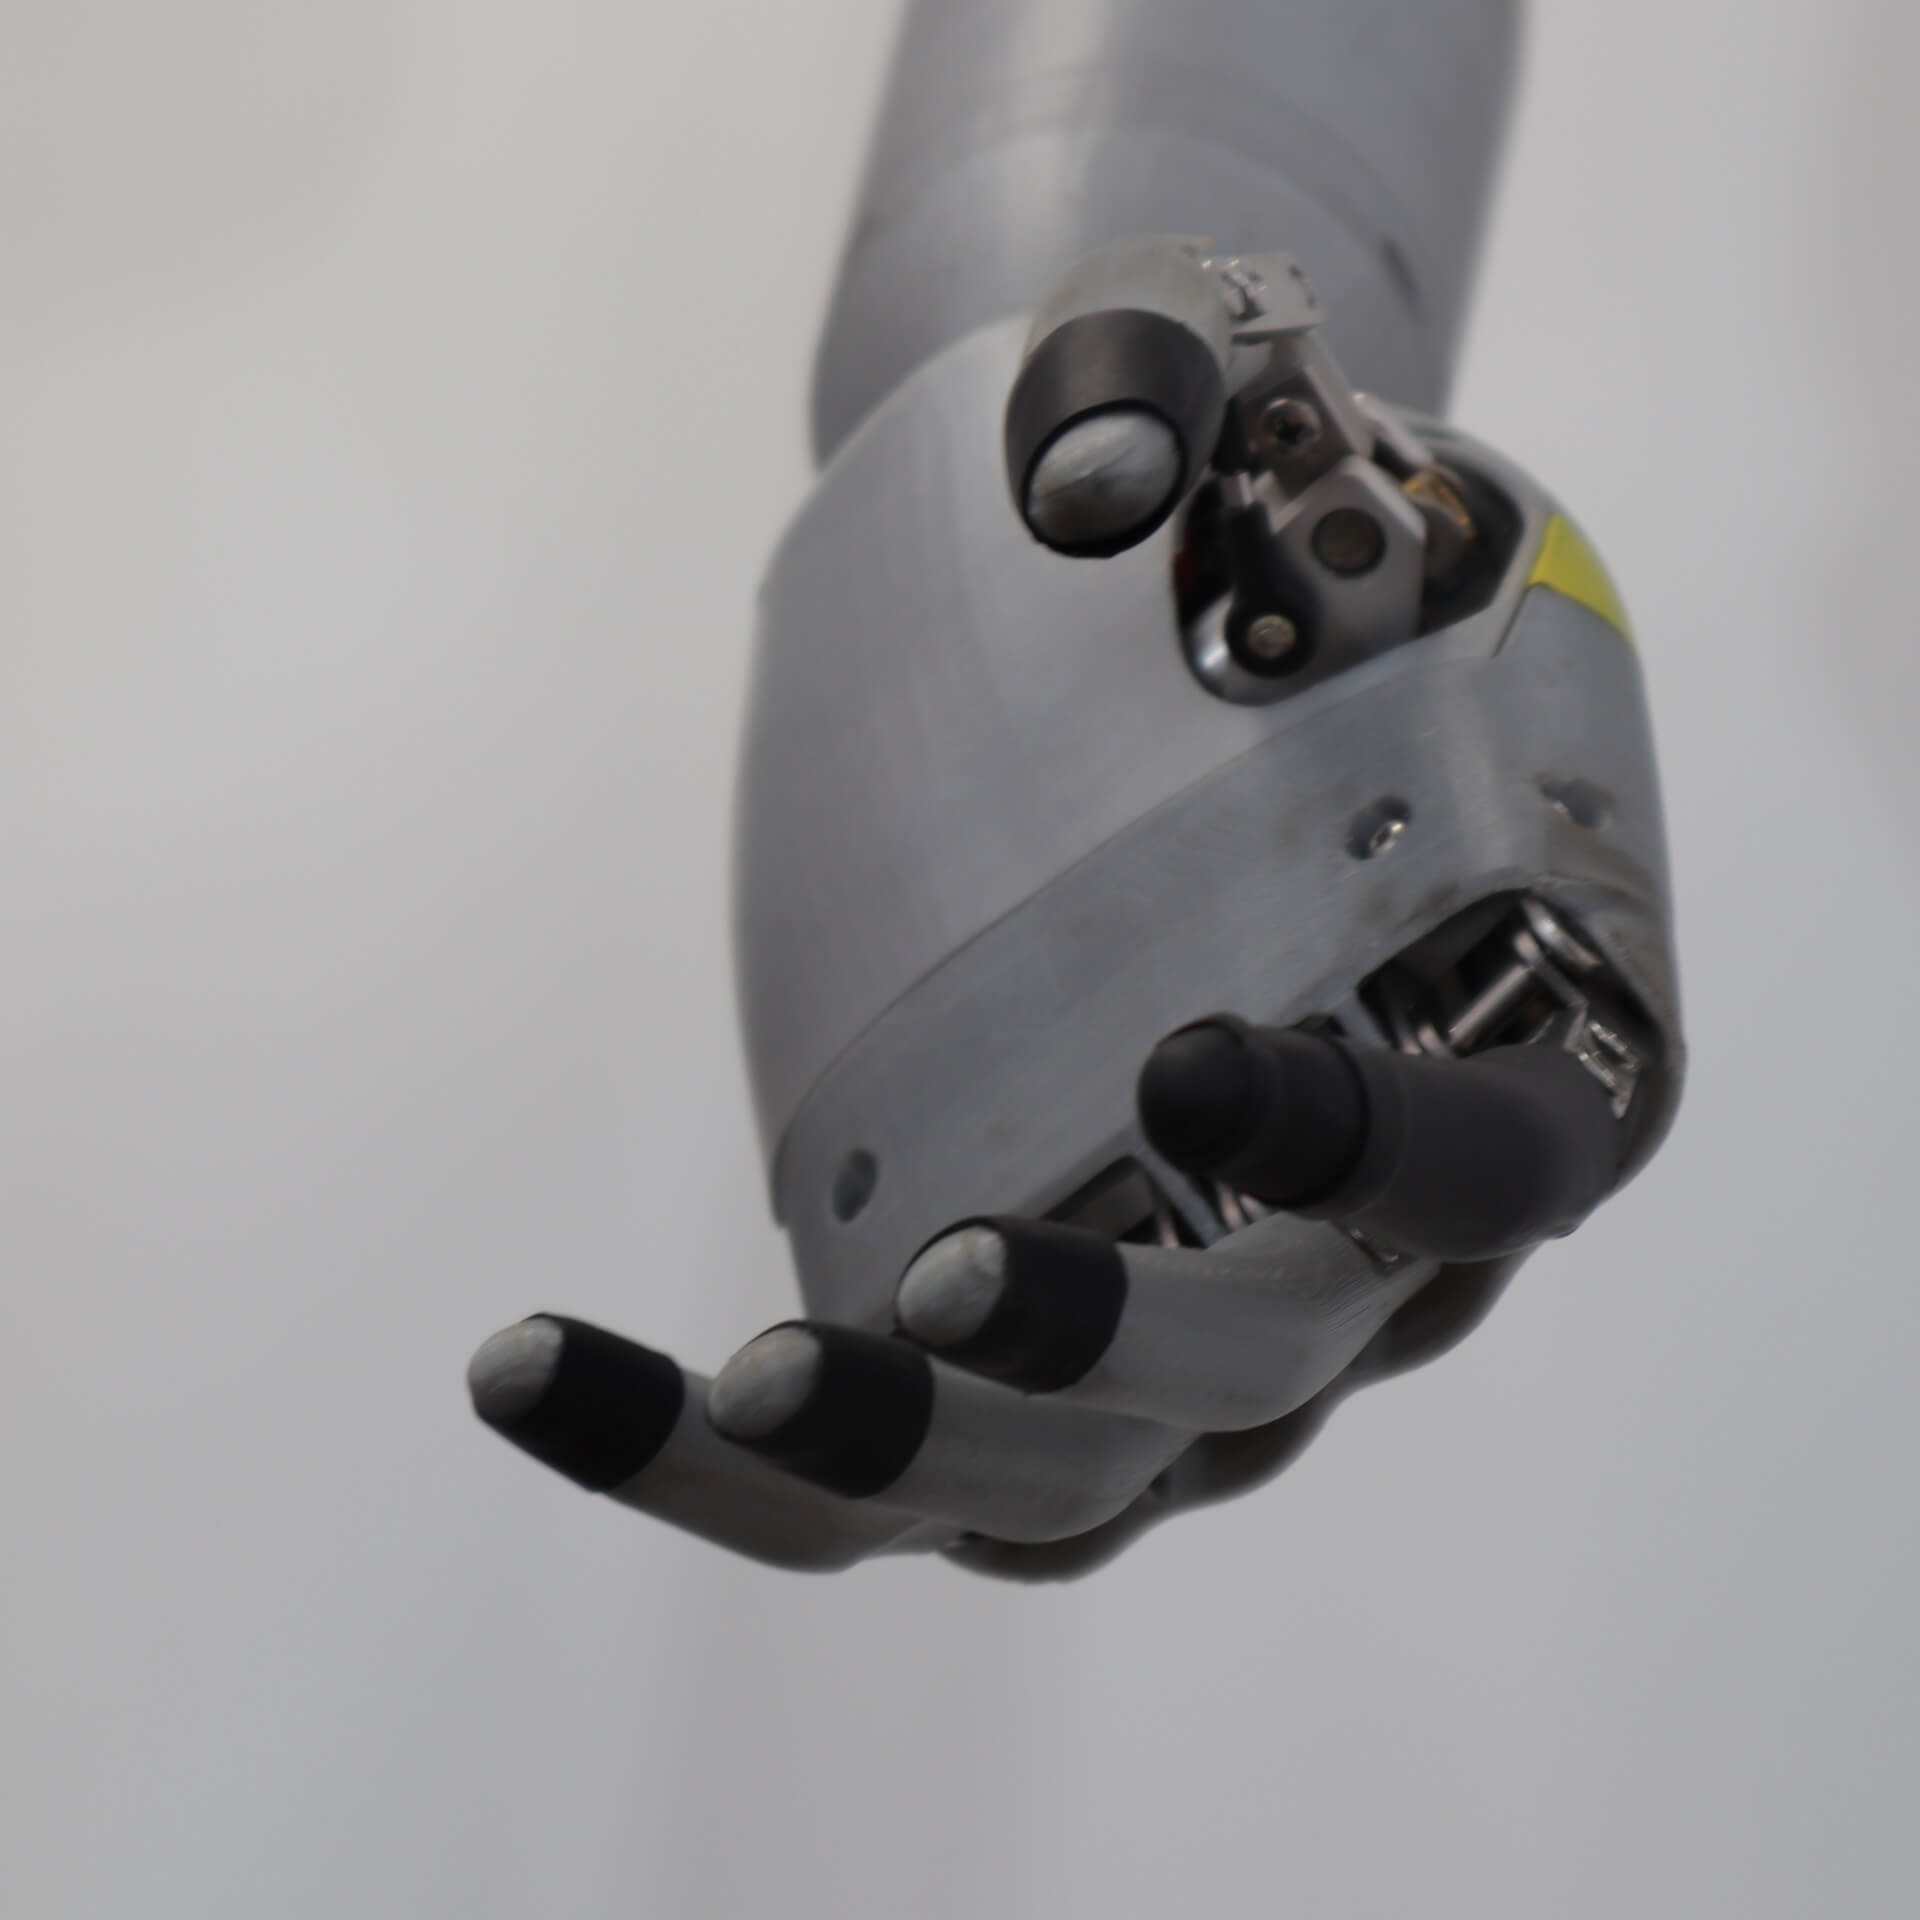 Bionic hand prosthesis, close-up of the hand in a gesture of grasping something